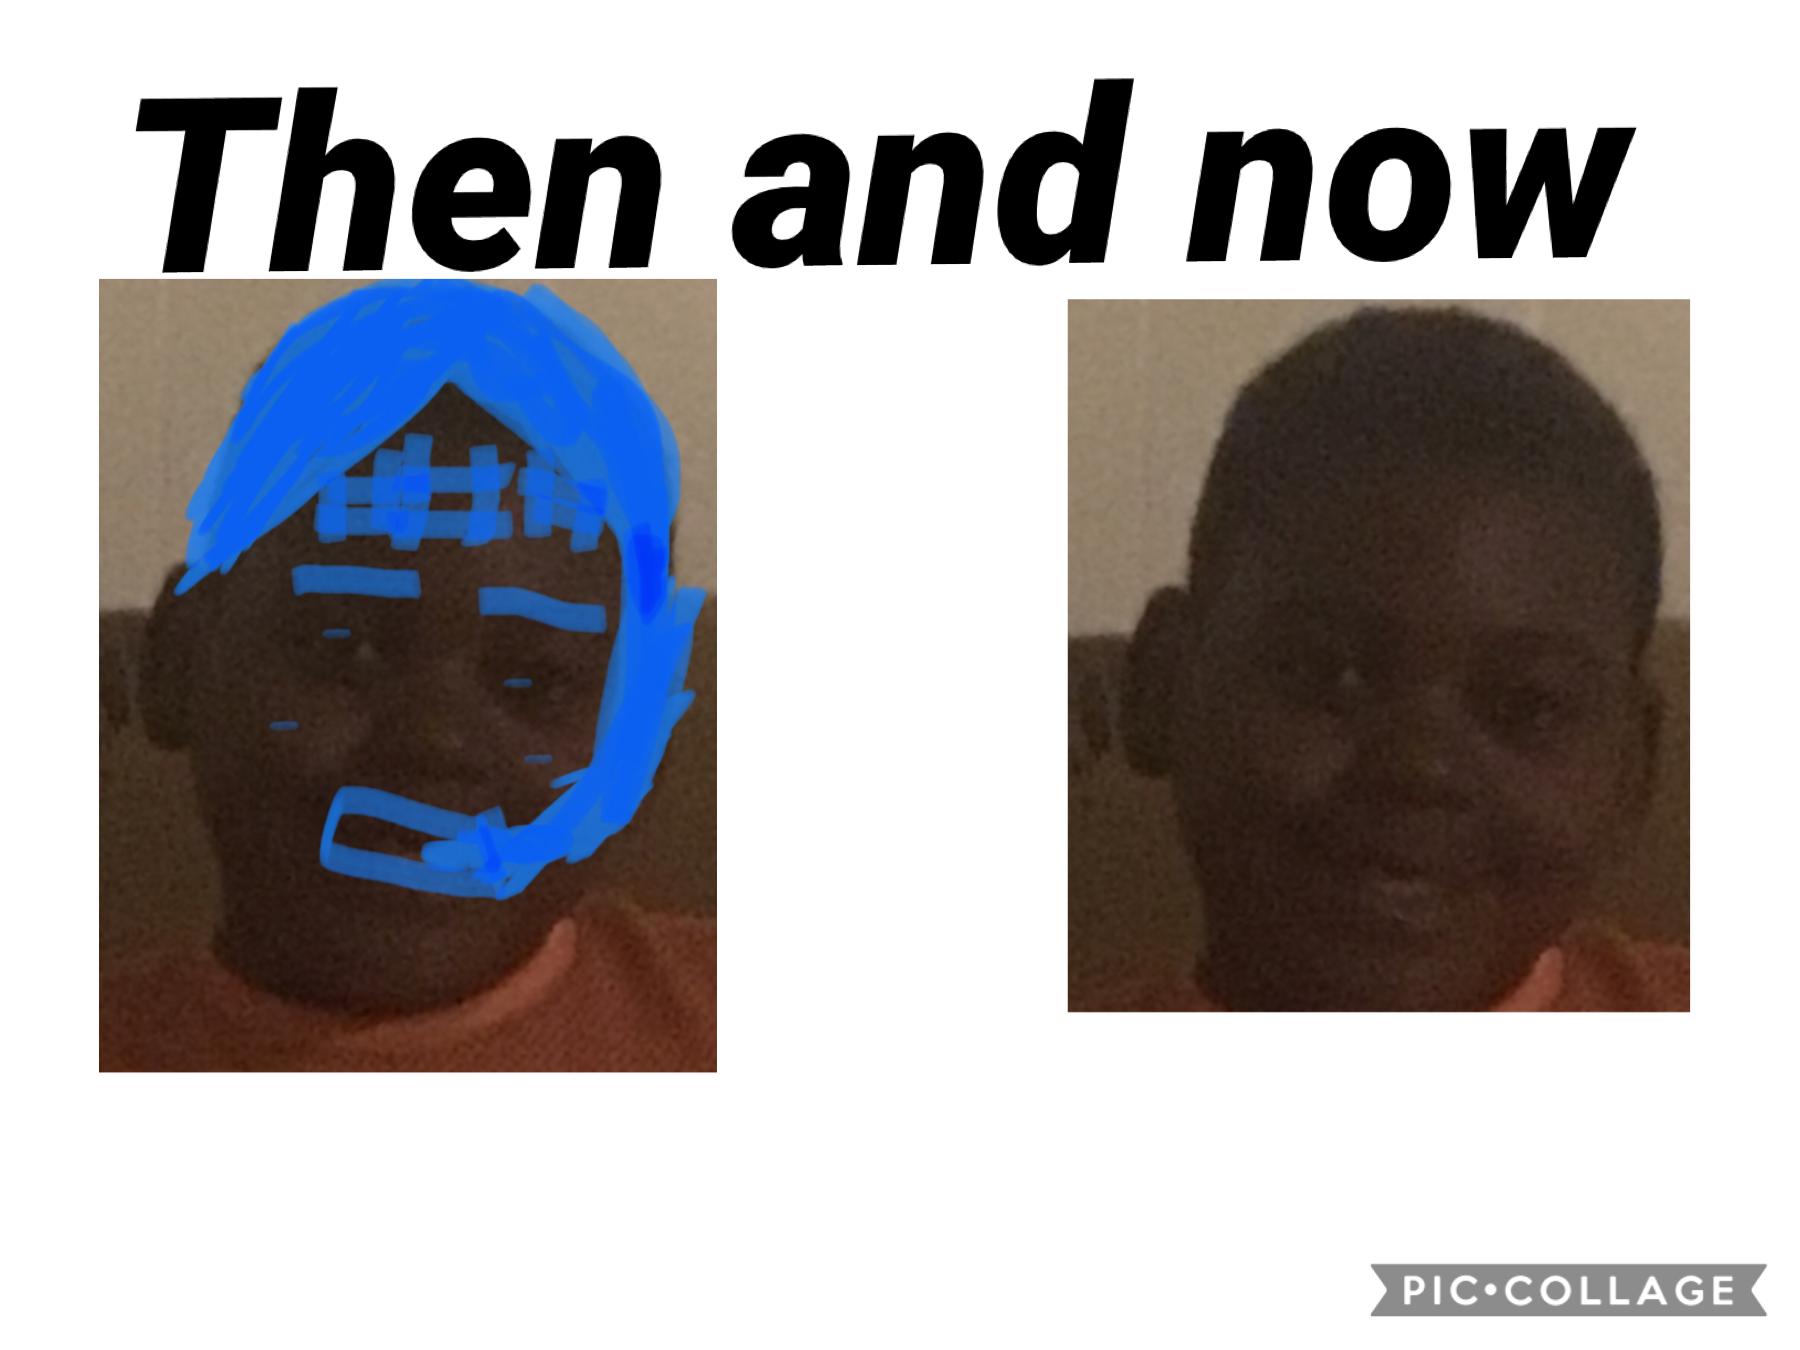 Then and now